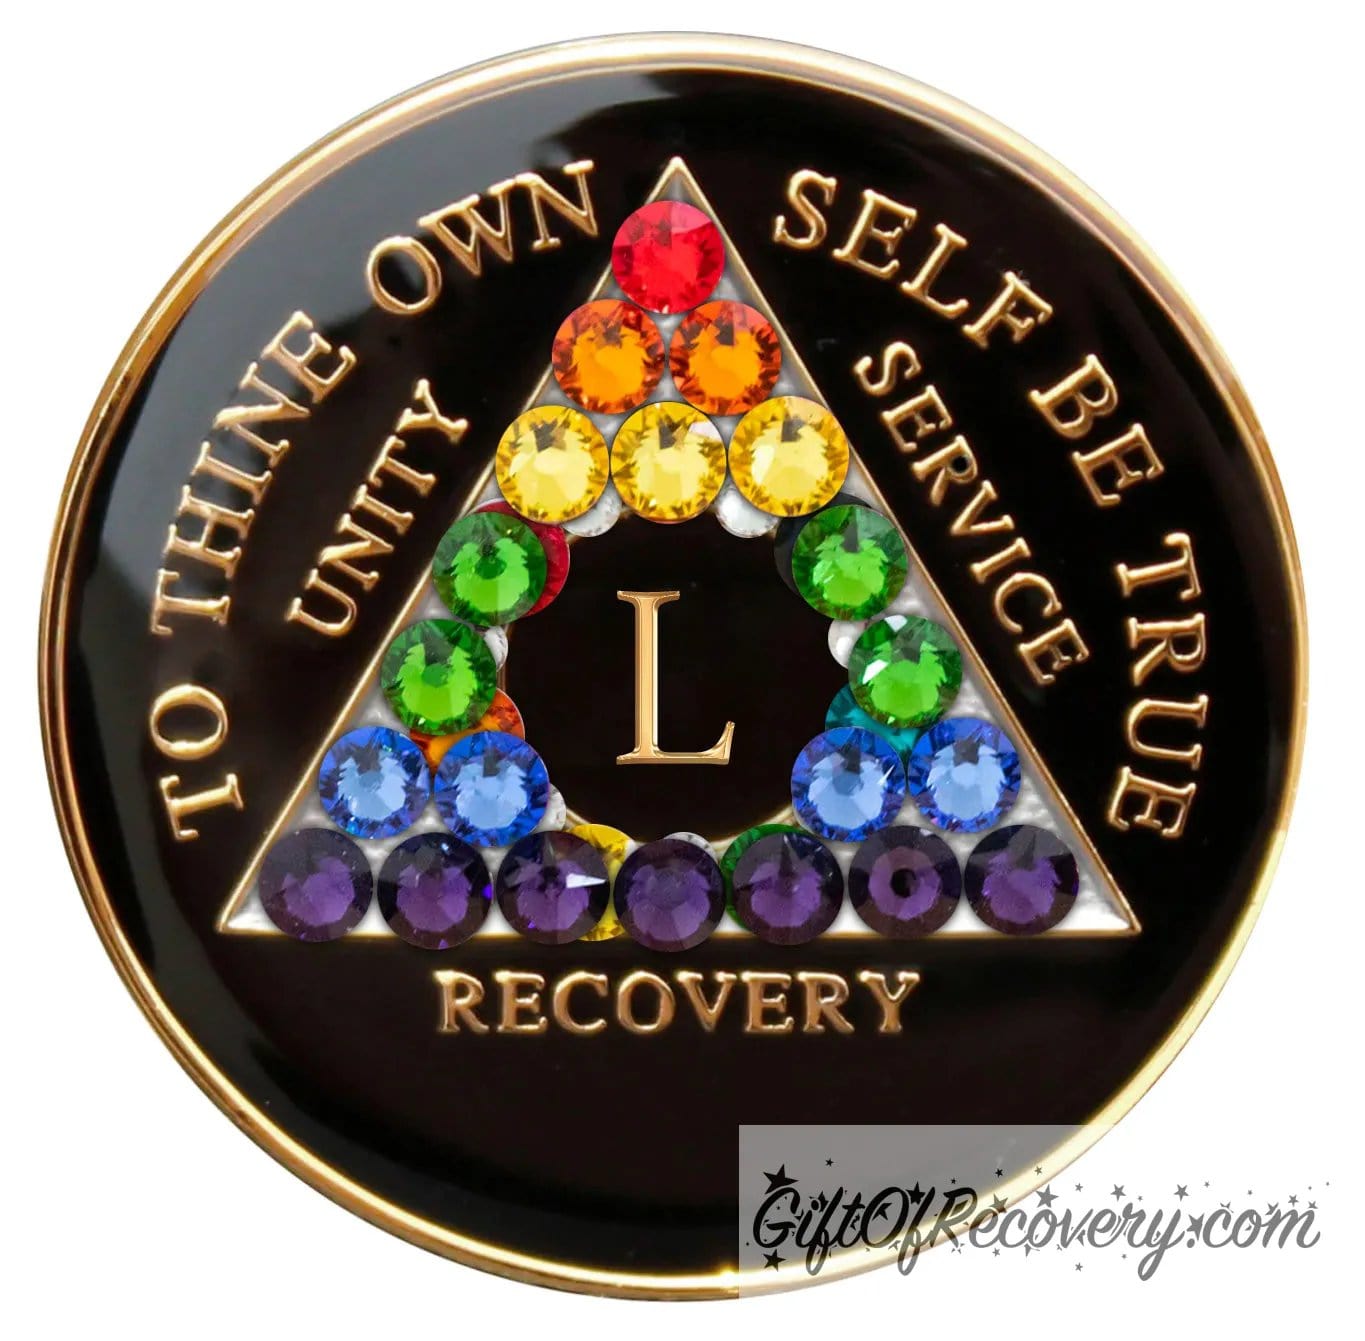 50 year AA medallion with 21 rainbow genuine crystals to represent the LBGTQIA+ community, show your pride with this Black onyx resin sealed recovery medallion that has 14k gold plated brass lettering of to thine own self be true, unity, service, recovery, and the roman numeral.